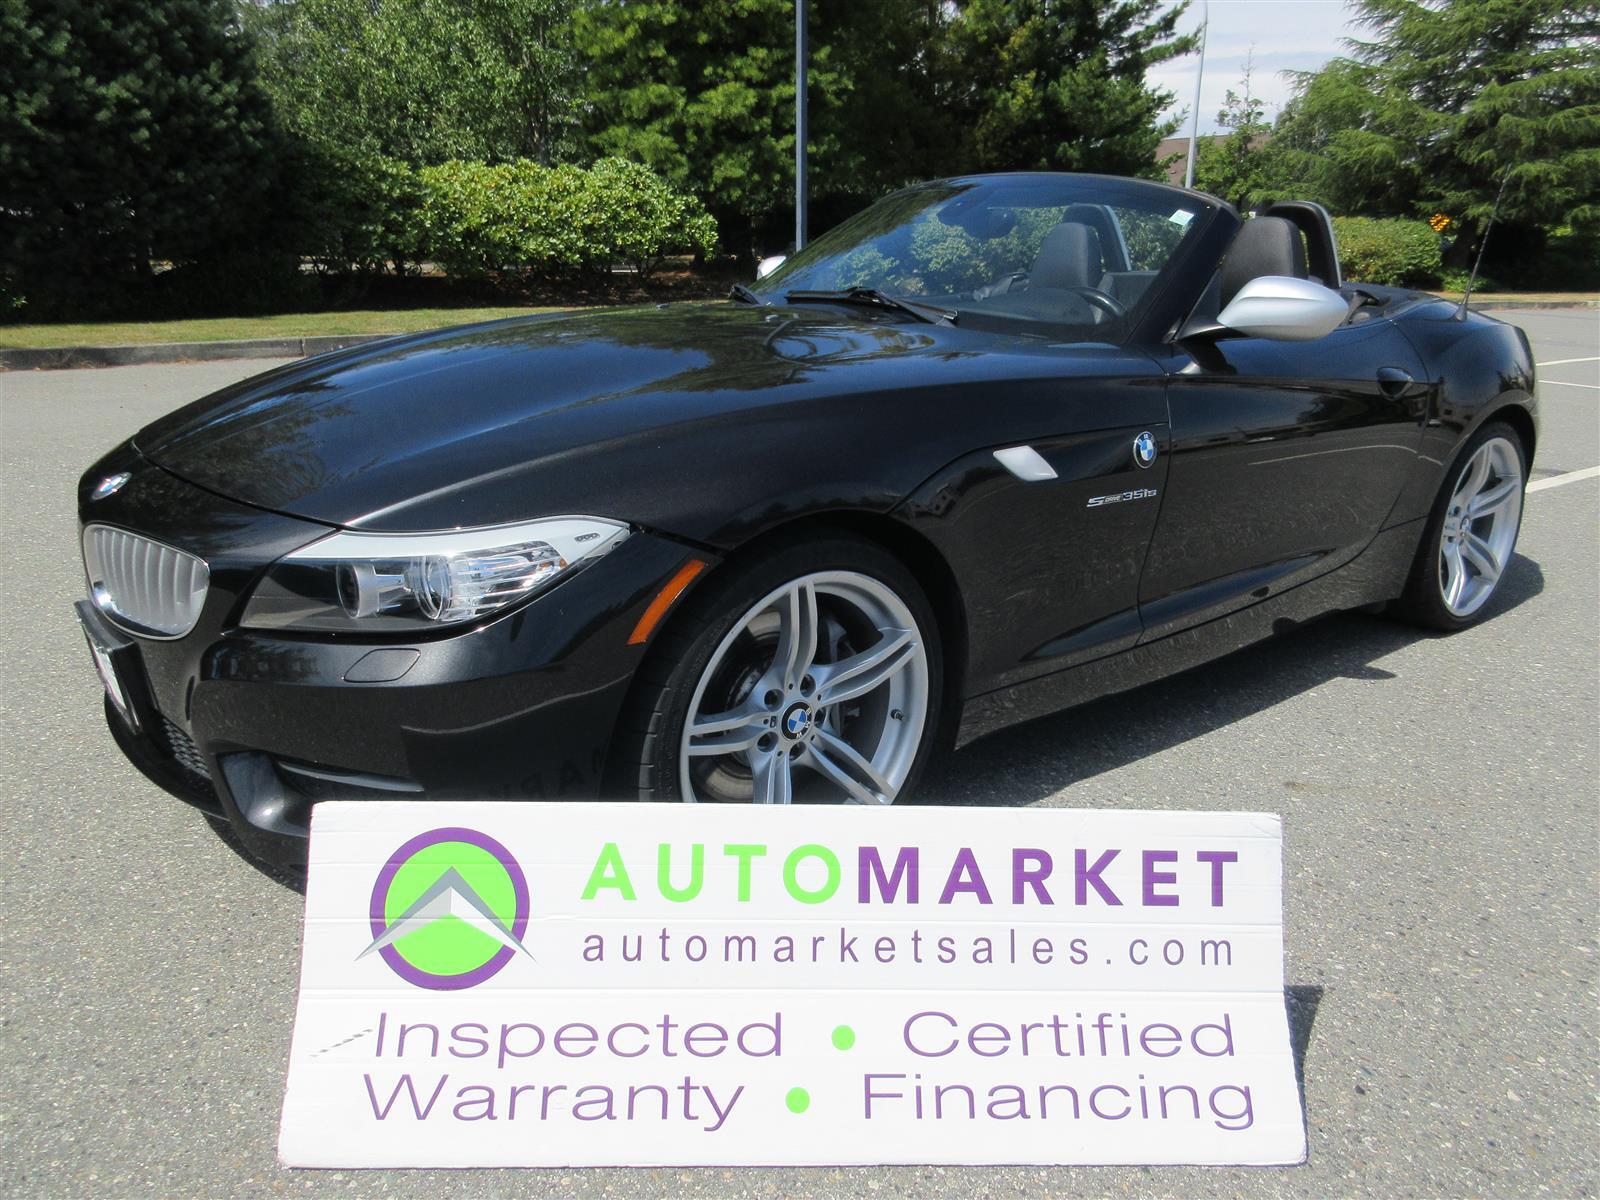 2011 BMW Z4 sDrive35is, AUTO, FINANCE, INSPECTED, BCAA MBSHP, 